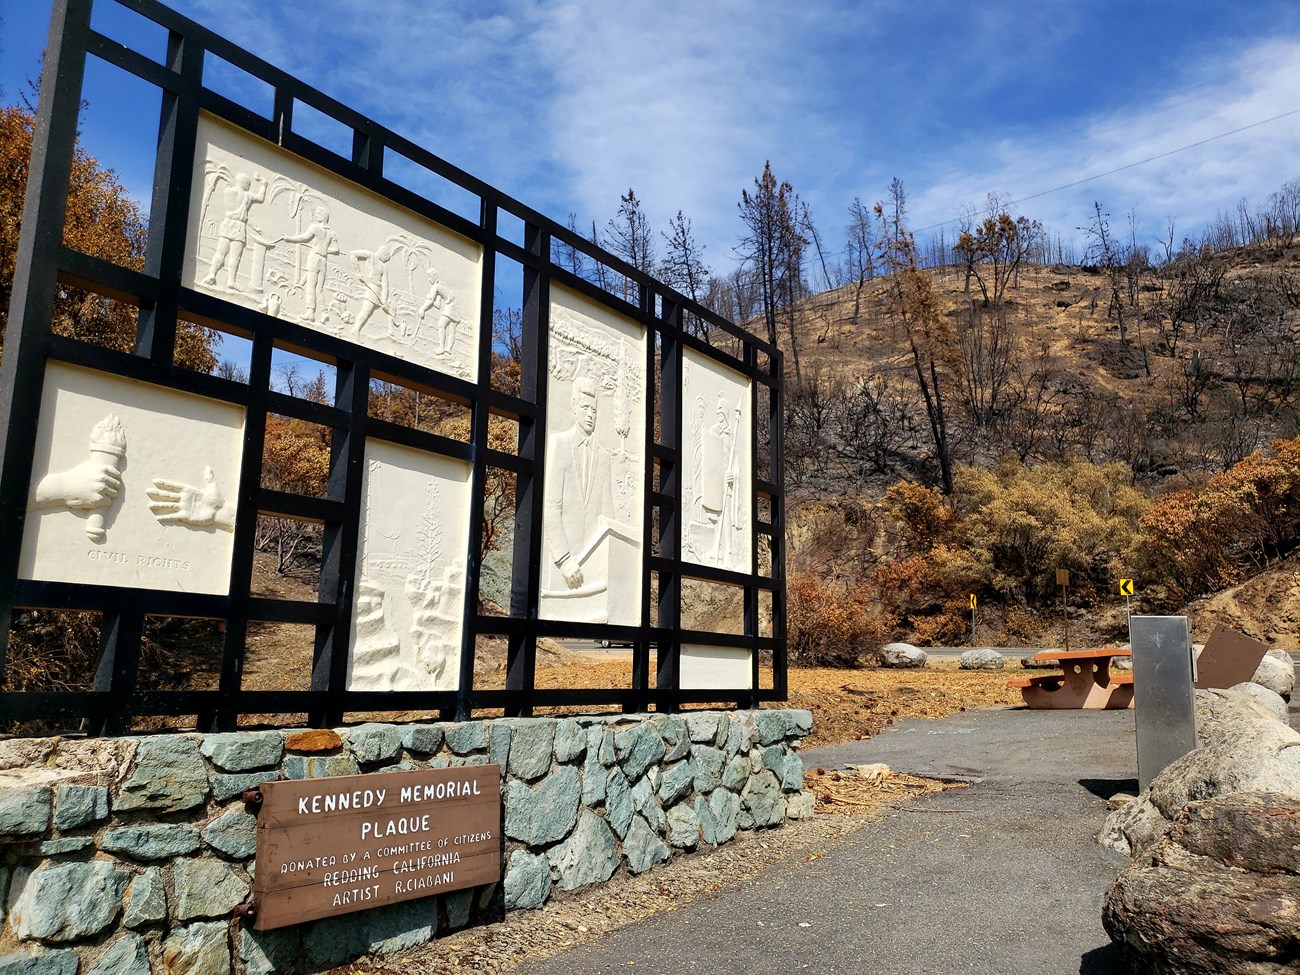 The Kennedy Memorial inside Whiskeytown National Recreation Area